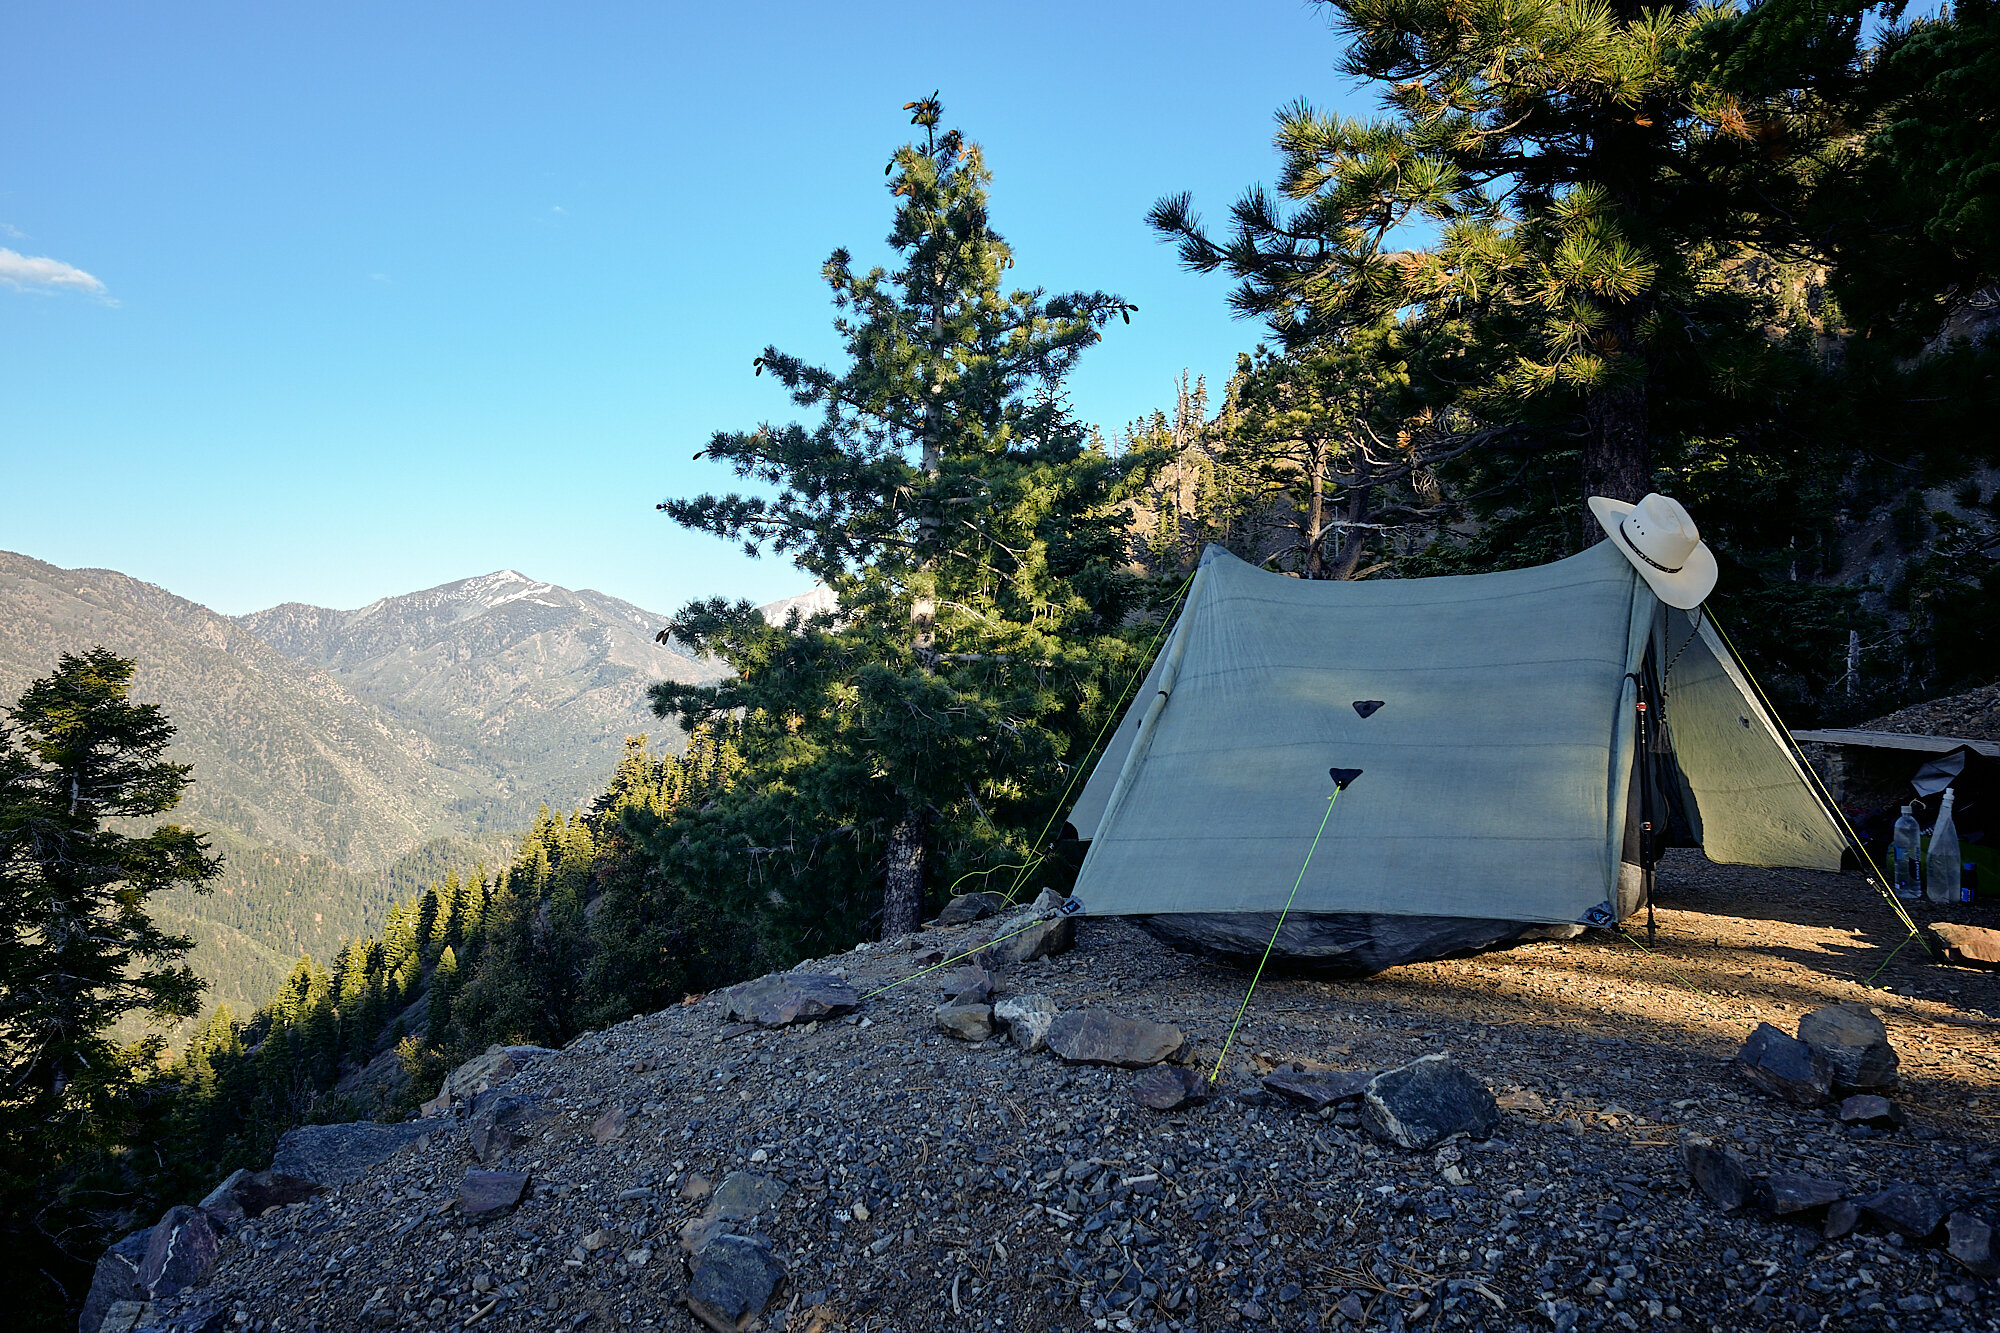  Lebowski and I were nursing some injuries, so we decided to take a backcountry zero day at this viewpoint below Mt. Baden Powell. | 5/29/19 Mile 374.7, 7,123' 